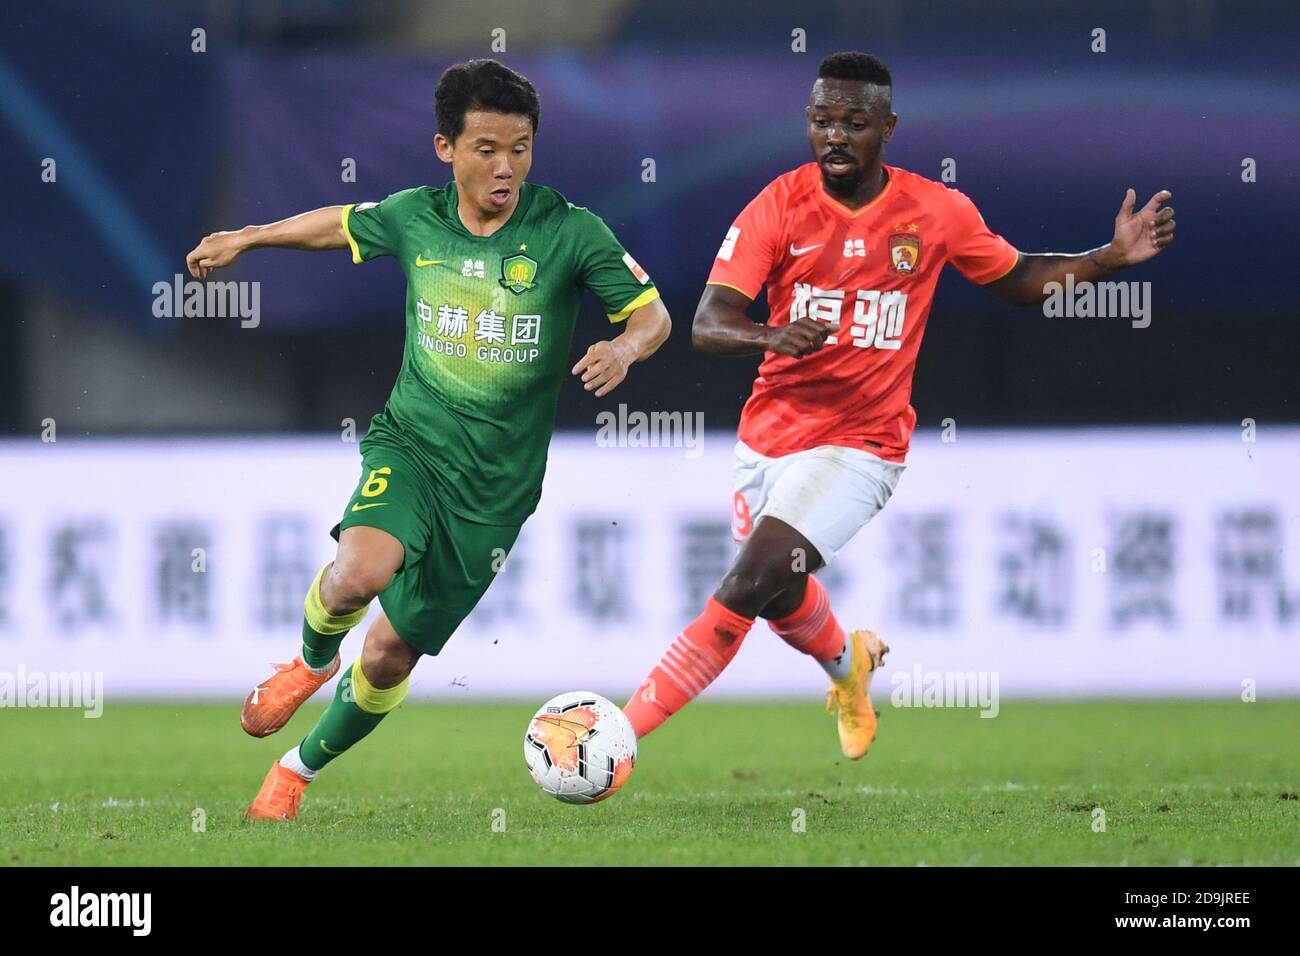 Brazilian-born Chinese football player Fernando Henrique, also known as Fei Nanduo, of Guangzhou Evergrande Taobao F.C., right, chases after the ball Stock Photo